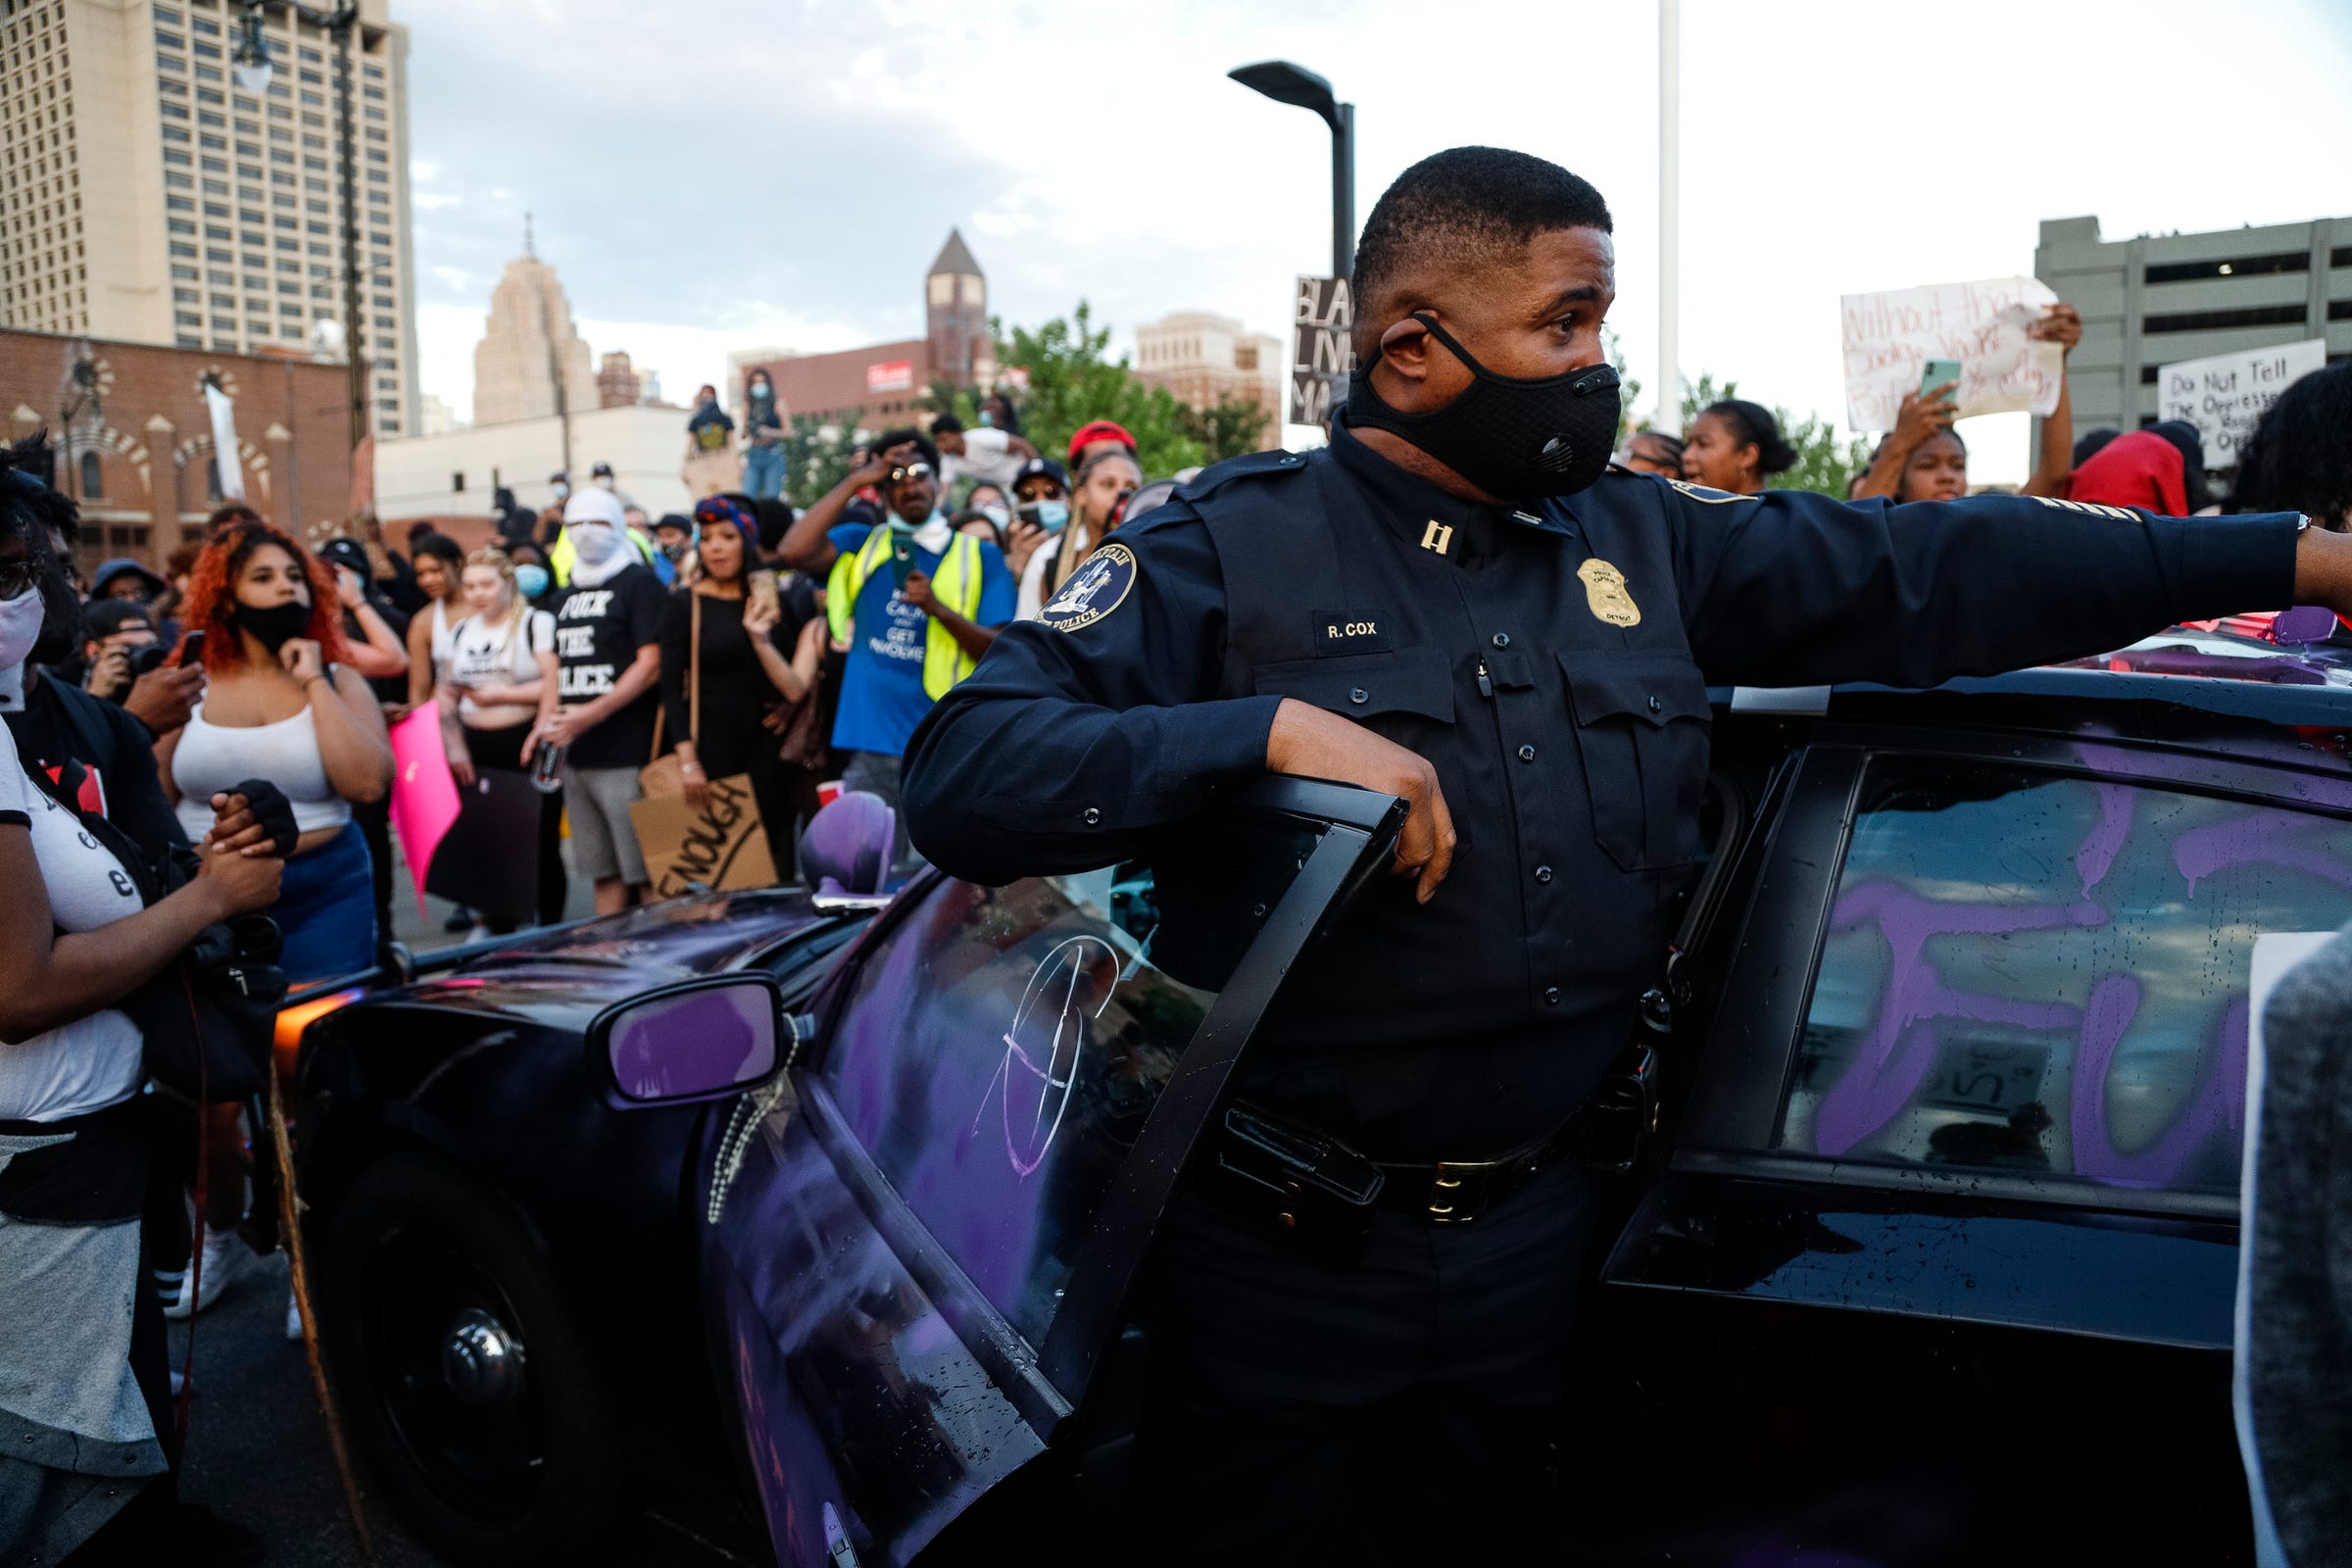 Protesters vandalized a Detroit police vehicle in front of the Detroit police headquarters as hundreds gathered and marched through Corktown and downtown to protest police brutality and the death of George Floyd, Friday, May 29, 2020.